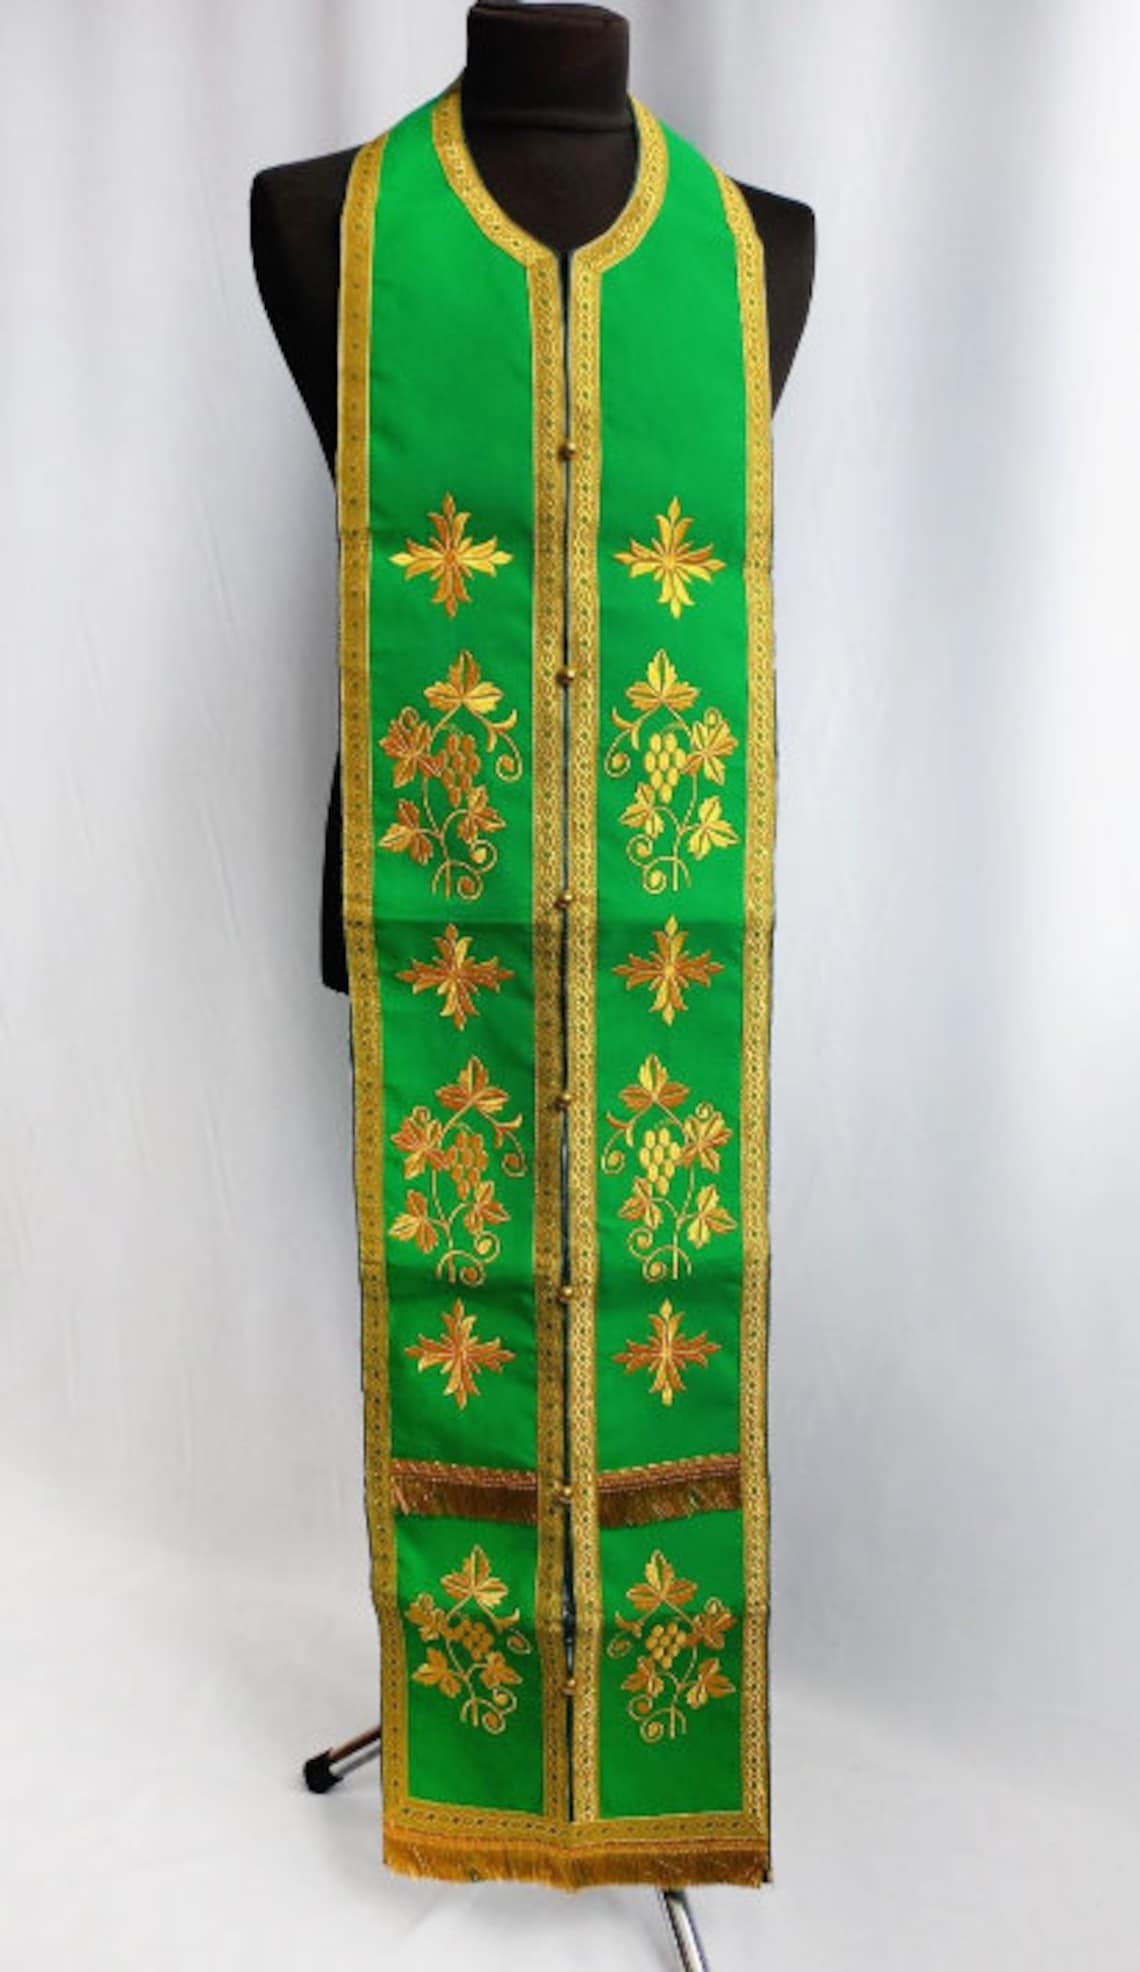 where to find firelords vestments